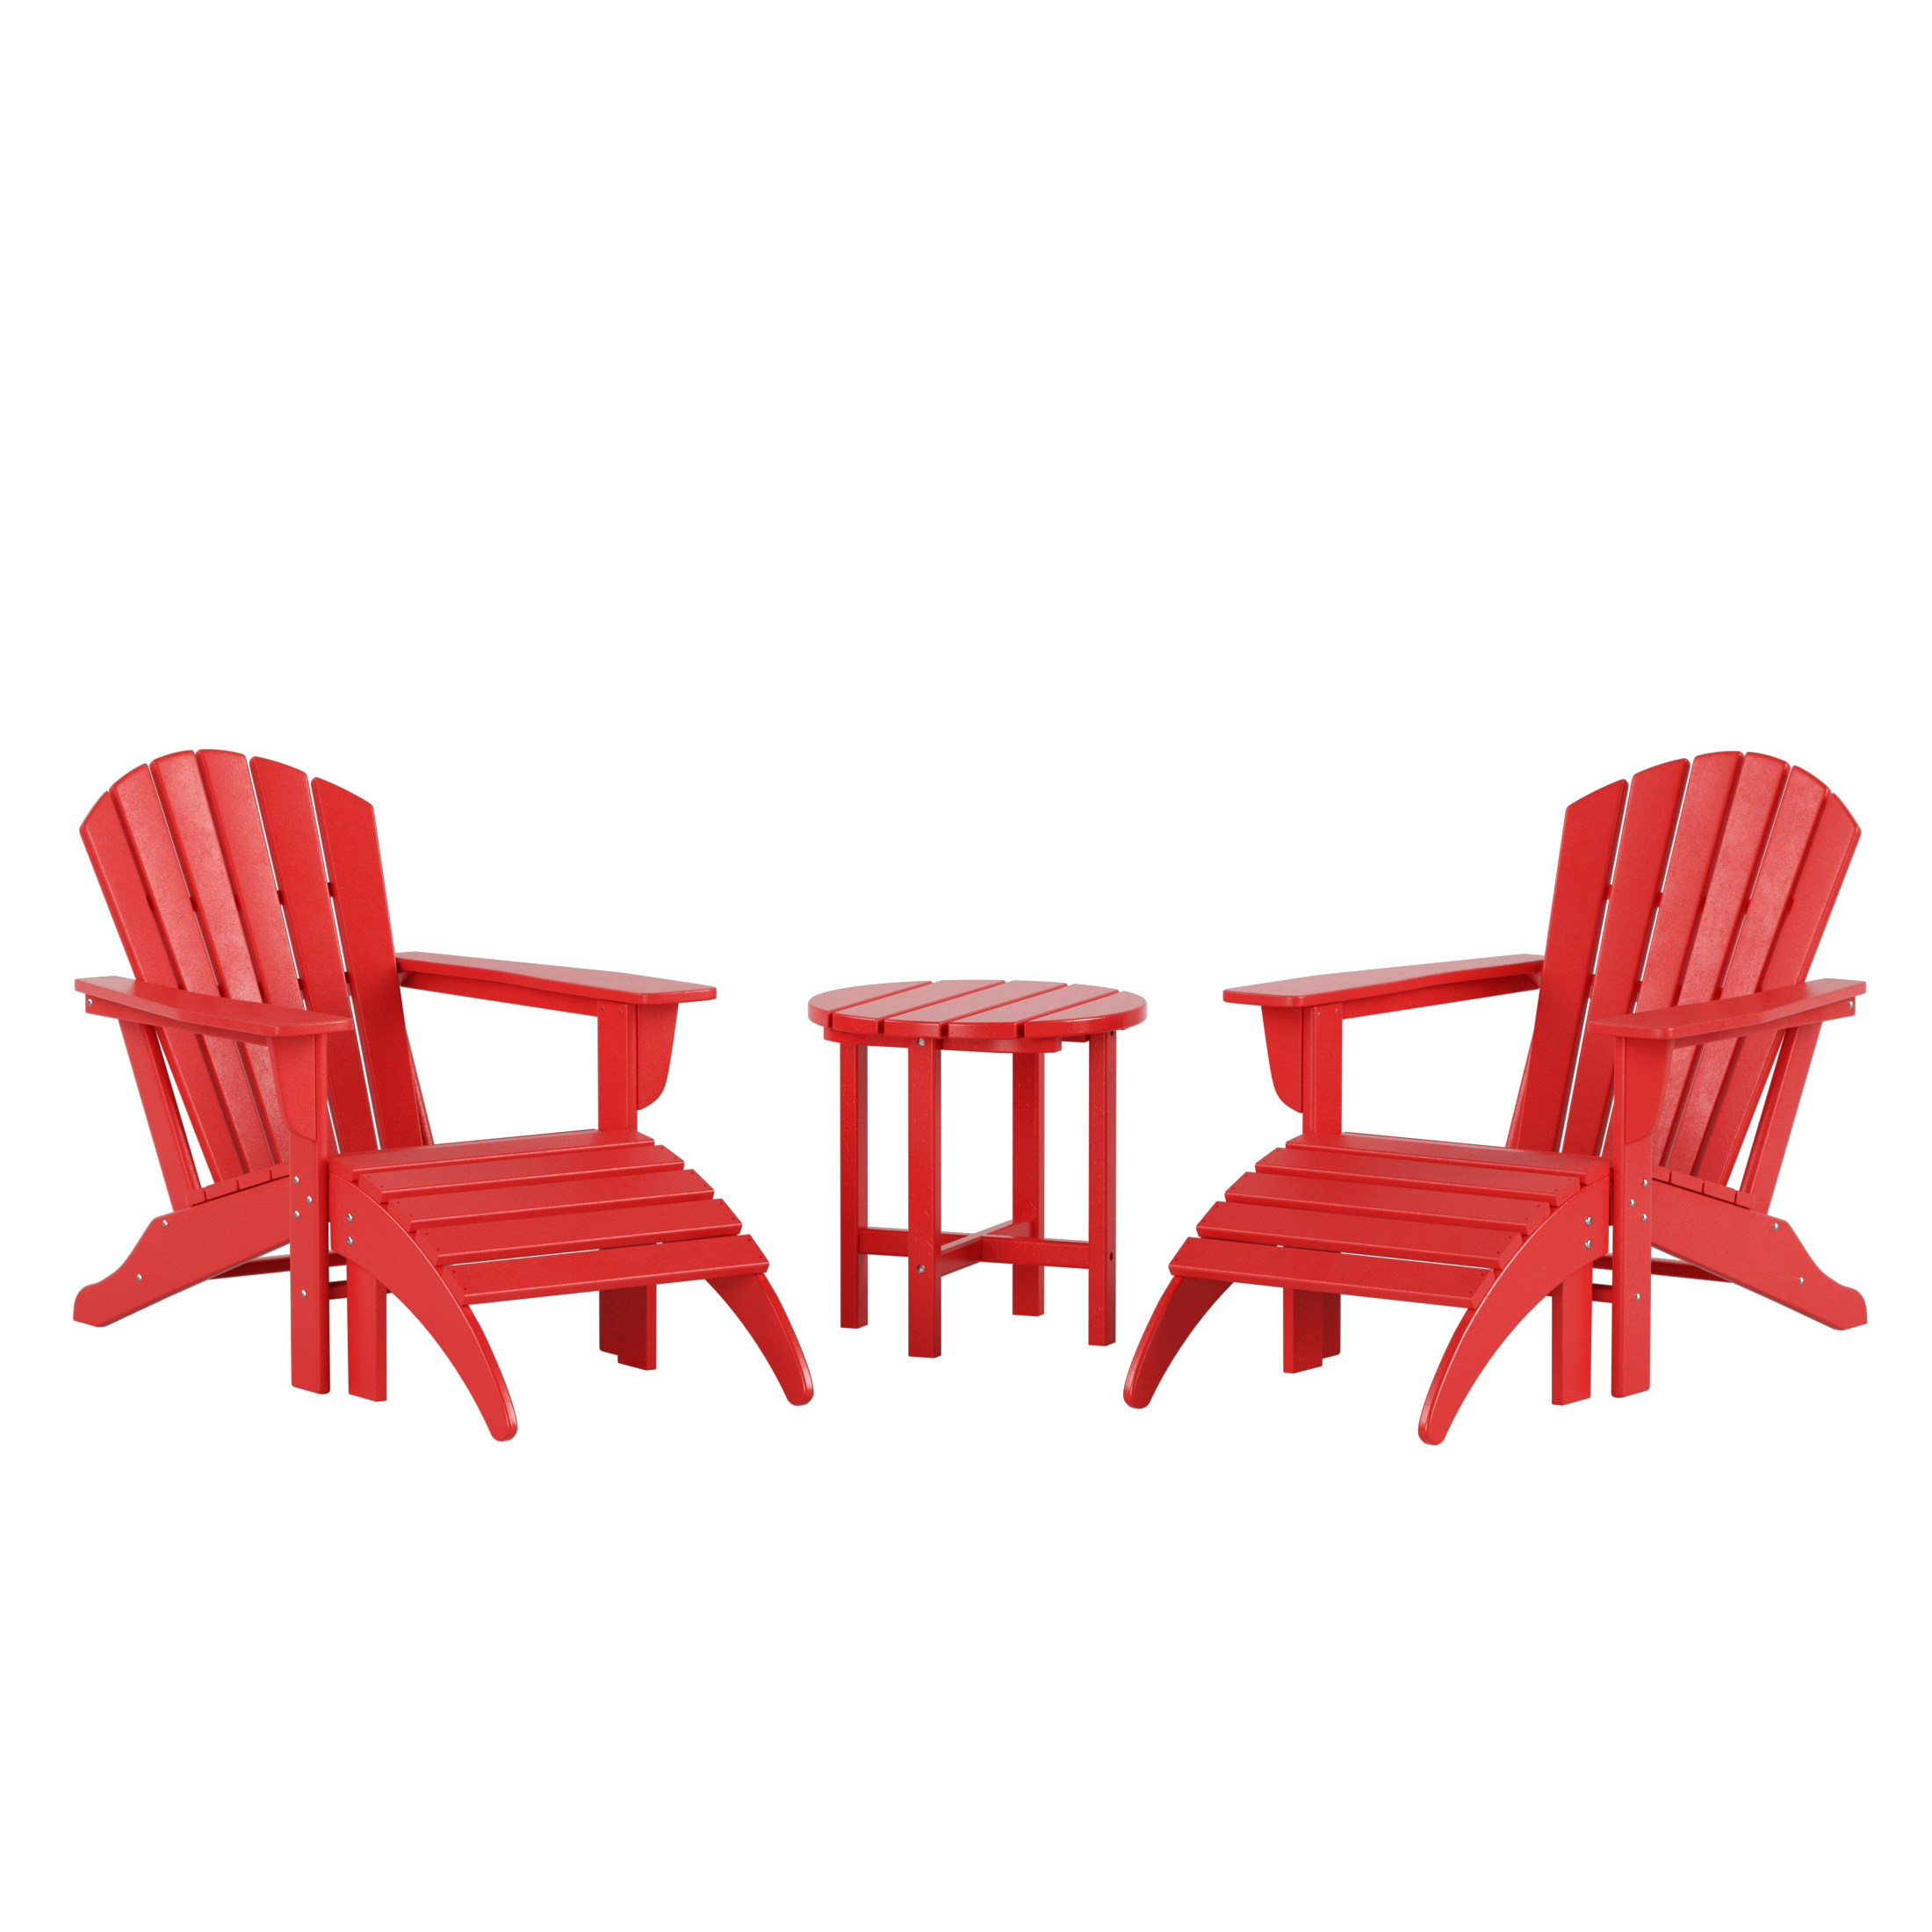 WestinTrends Dylan Outdoor Lounge Chairs Set of 2, 5 Pieces Seashell Adirondack Chairs with Ottoman and Side Table, All Weather Poly Lumber Outdoor Patio Chairs Furniture Set, Red - image 1 of 9